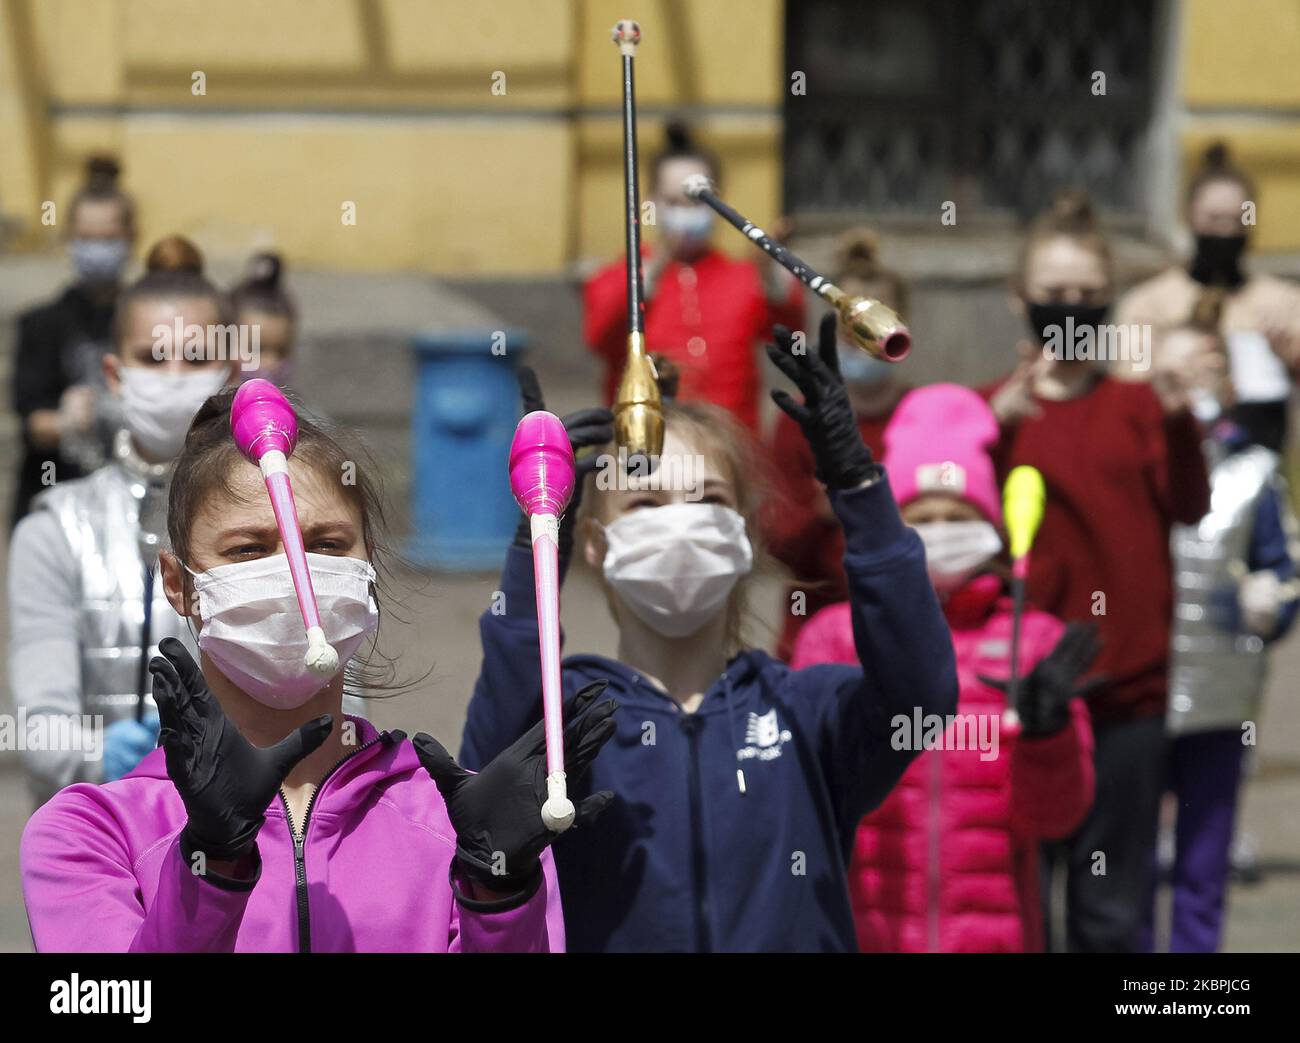 Gymnasts of the Deriugina School wearing protective masks amid the Covid-19 coronavirus epidemic take part at a trainning session on a street in central Kyiv, Ukraine, on 01 June, 2020. Young gymnasts had a training on a street to support the 'Save Deriugina School' action, which was organized in support of Irina Deryugina children's and youth sports school of gymnastics. (Photo by STR/NurPhoto) Stock Photo